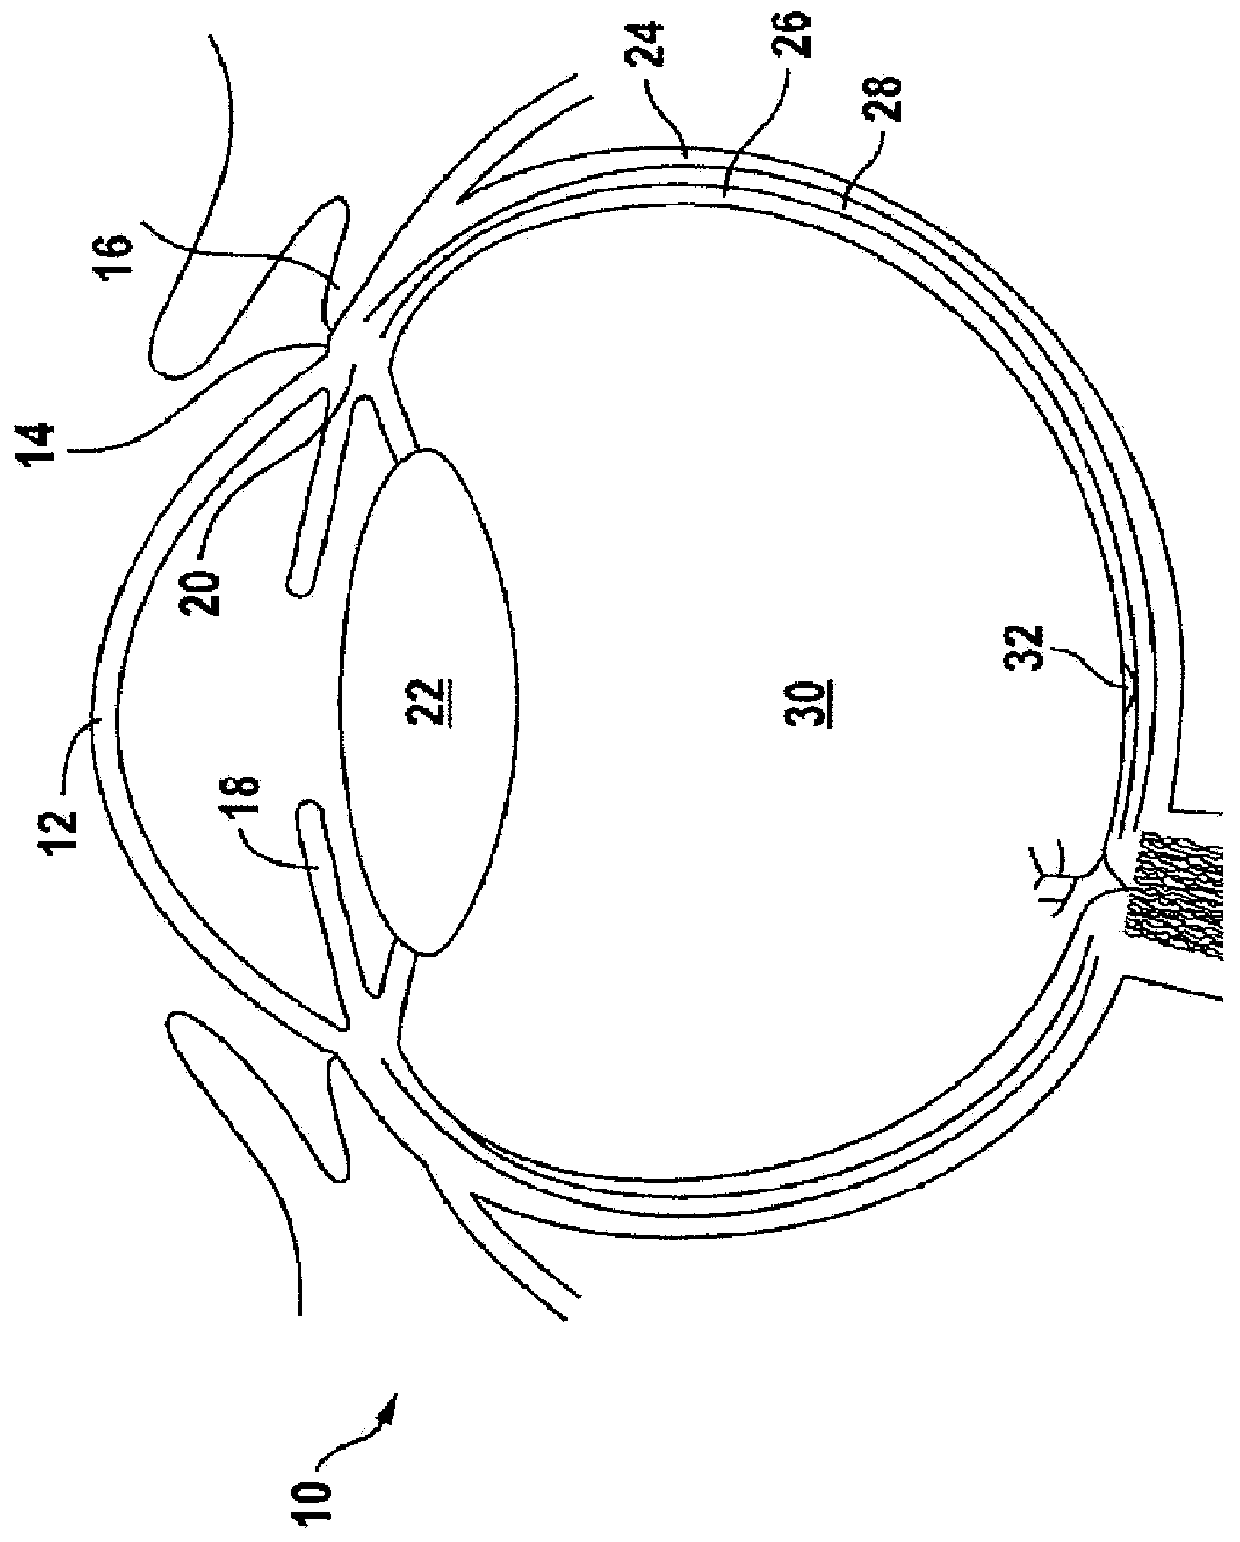 Ophthalmic implants for delivery of therapeutic substances